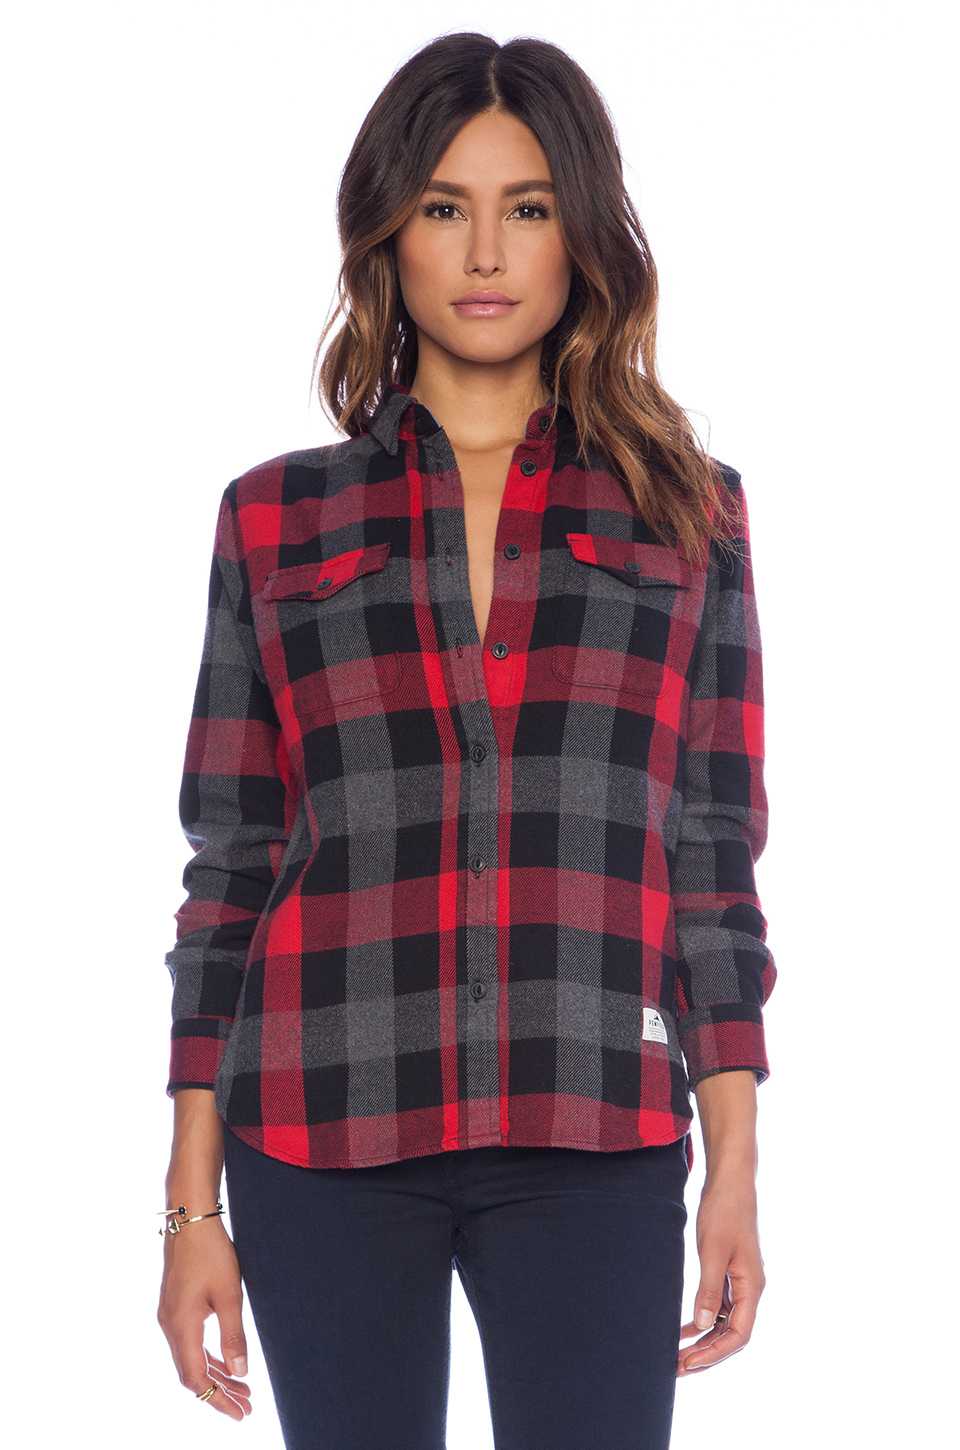 Lyst - Penfield Chatham Buffalo Plaid Shirt in Red